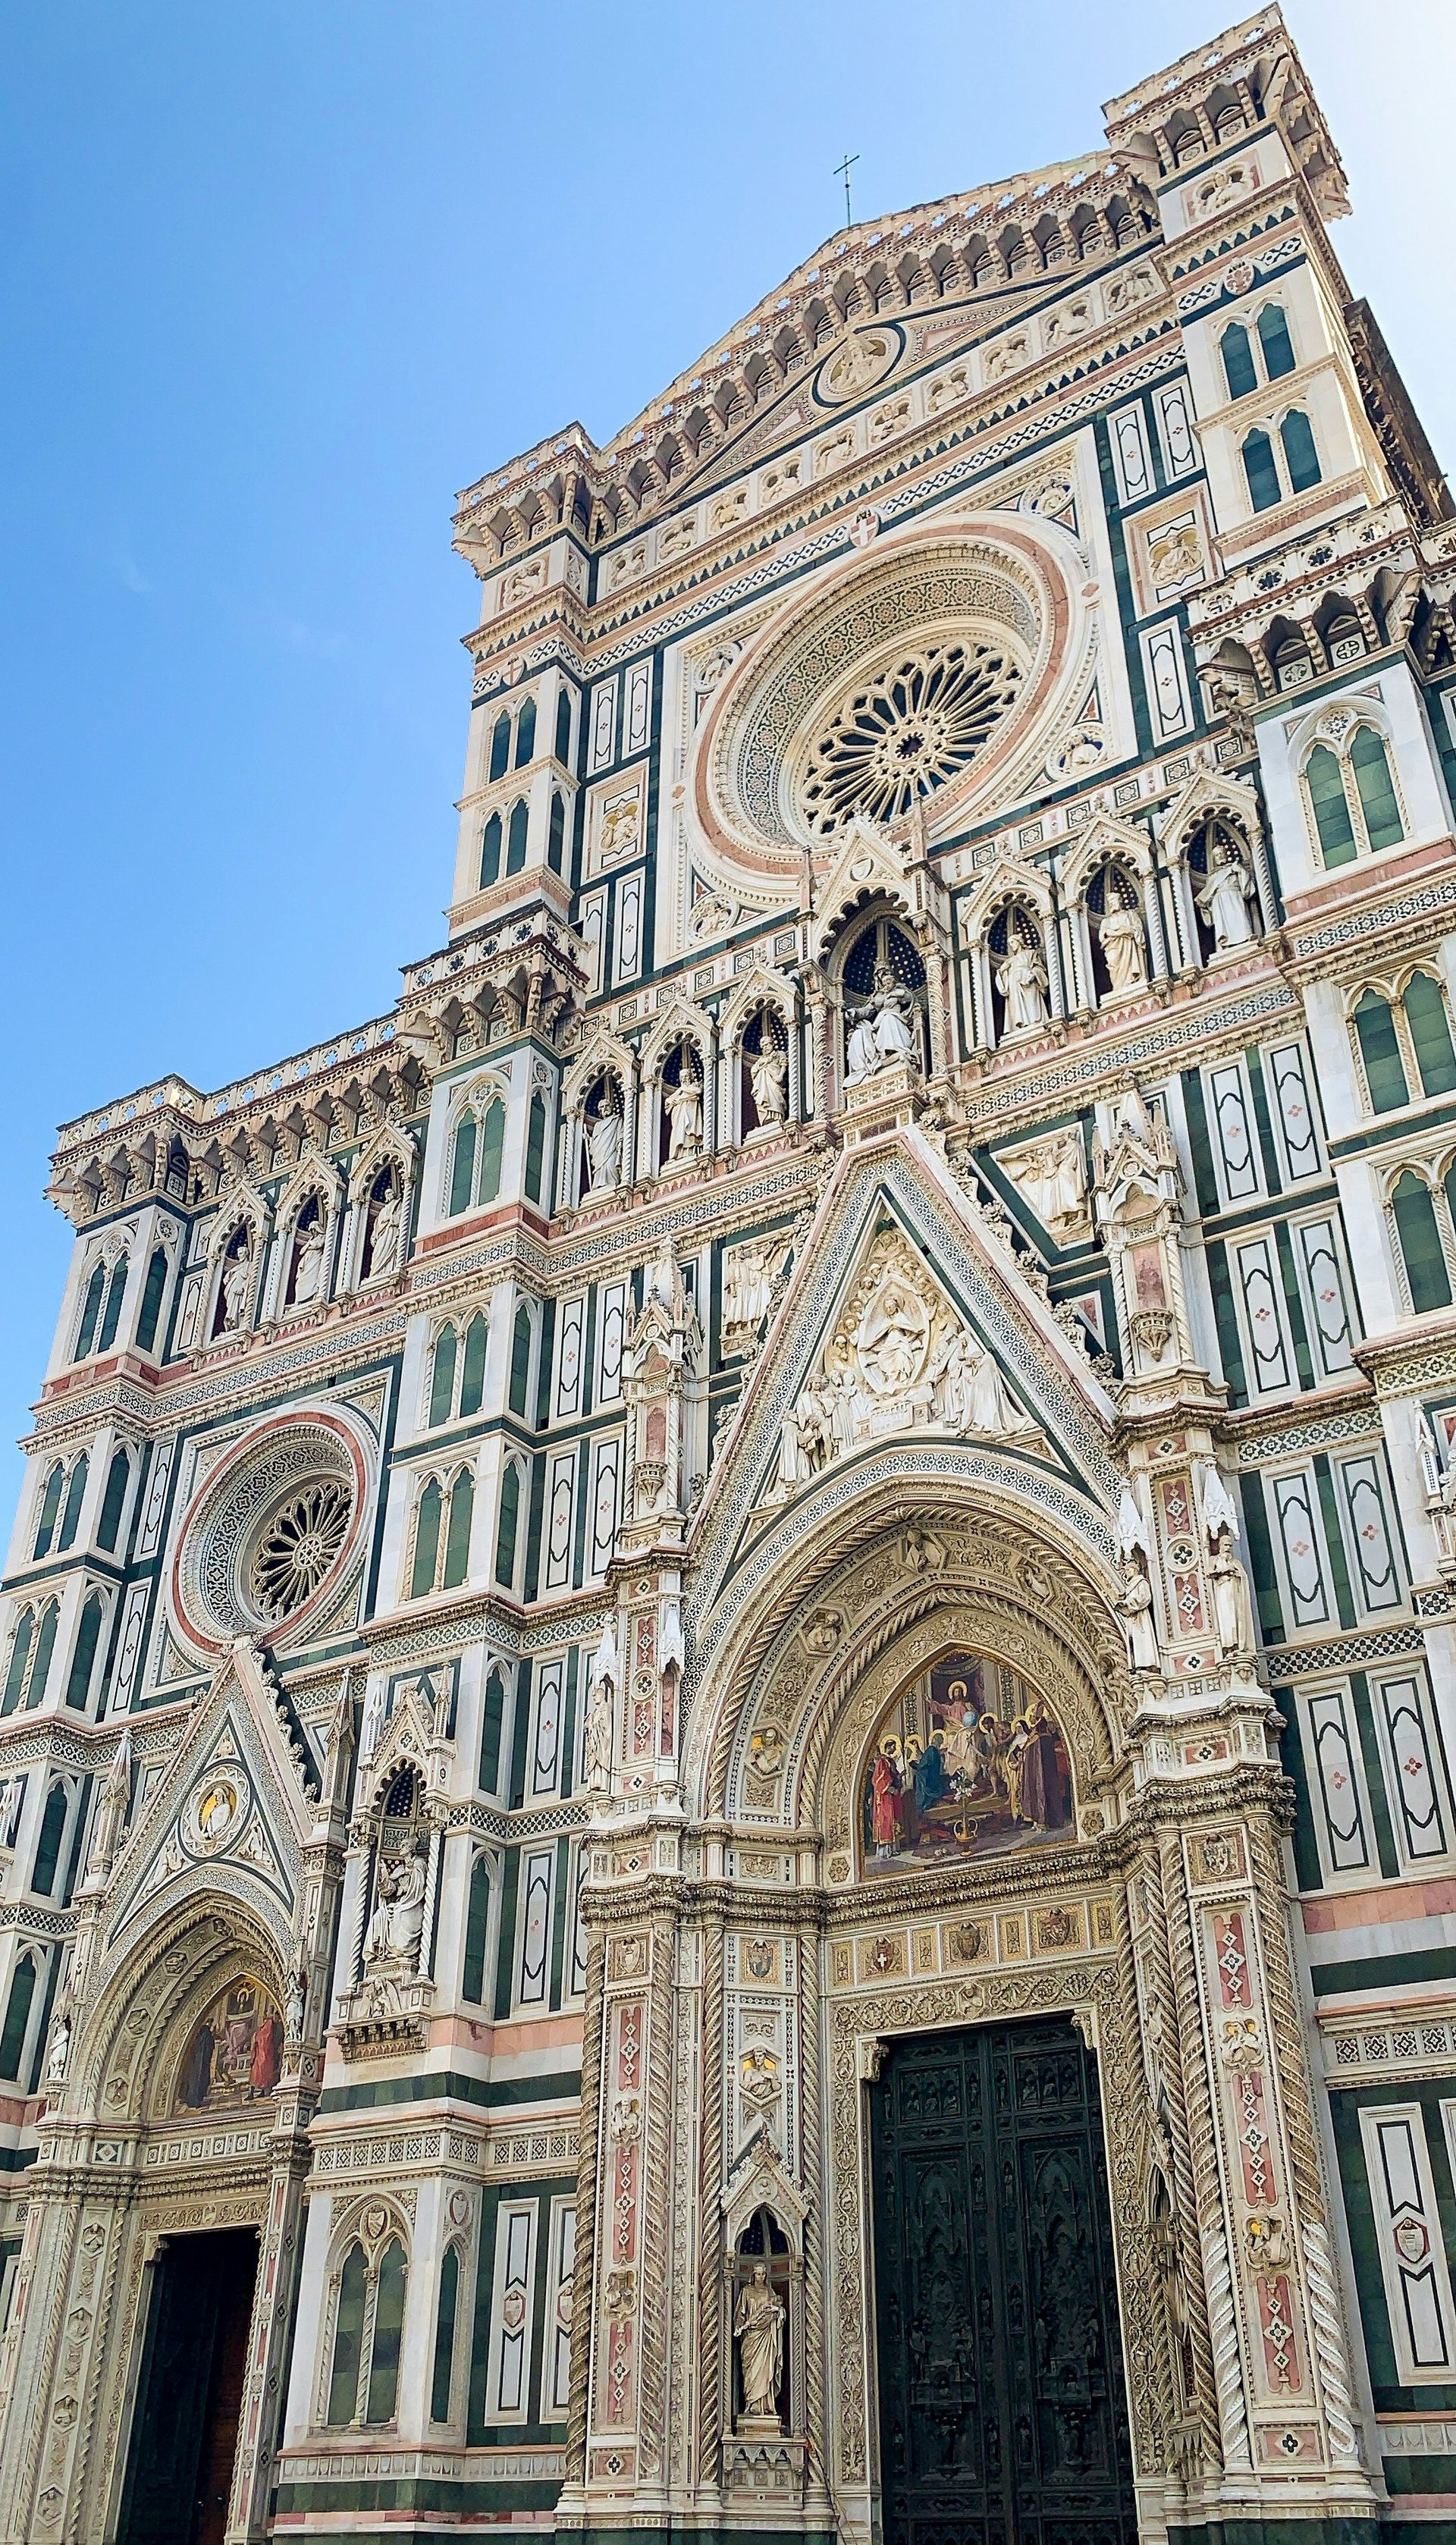 Cathedral of Santa Maria del Fiore during the day